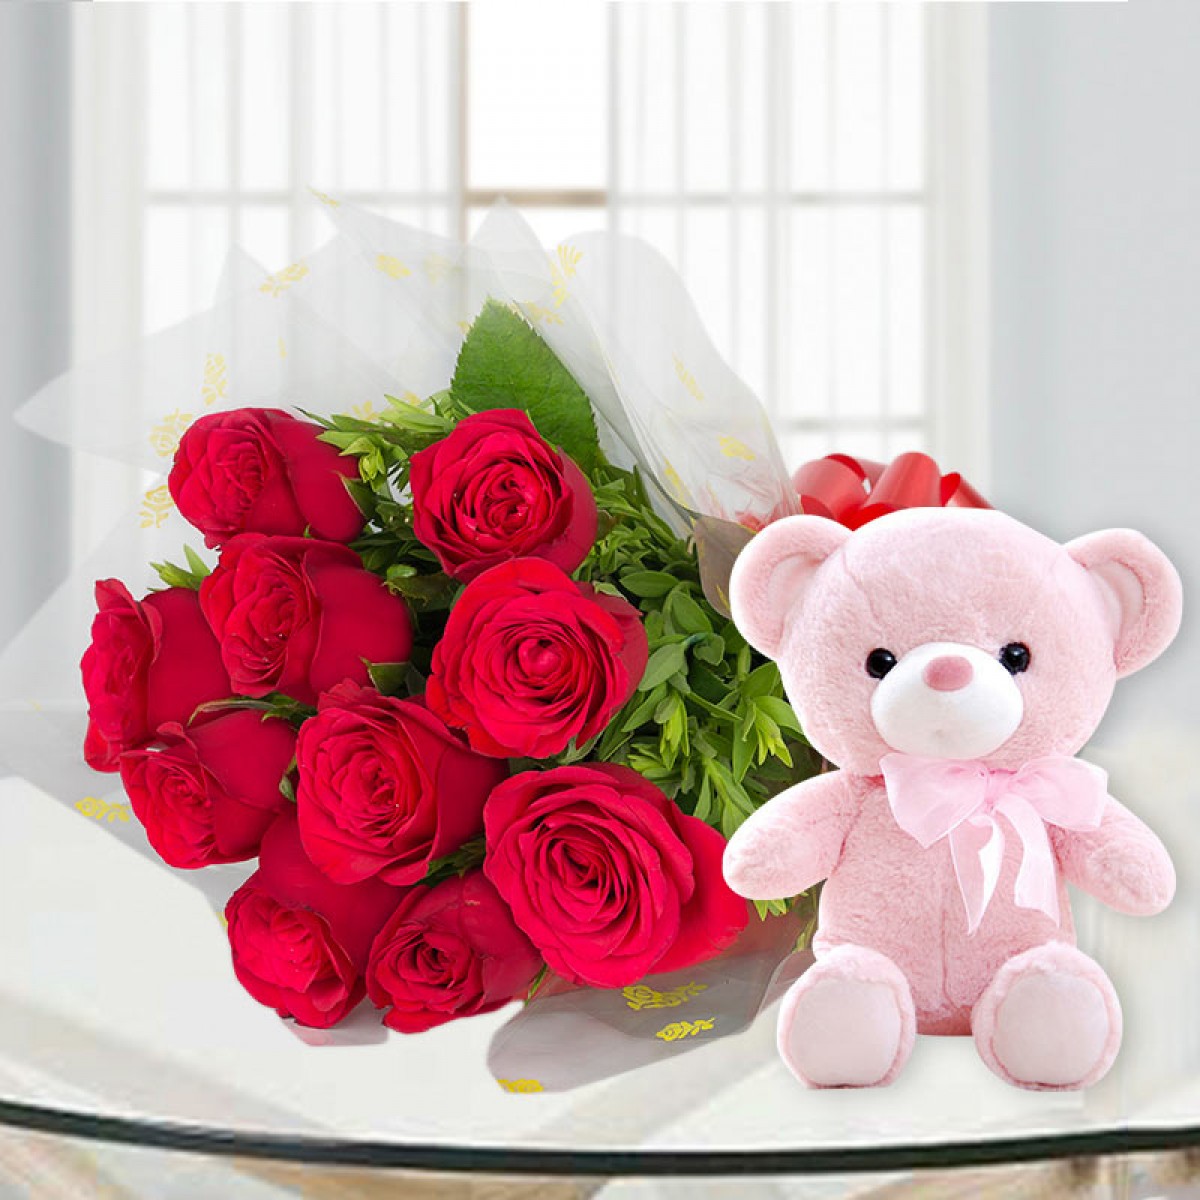 Buy Red roses with teddy bear Online at 